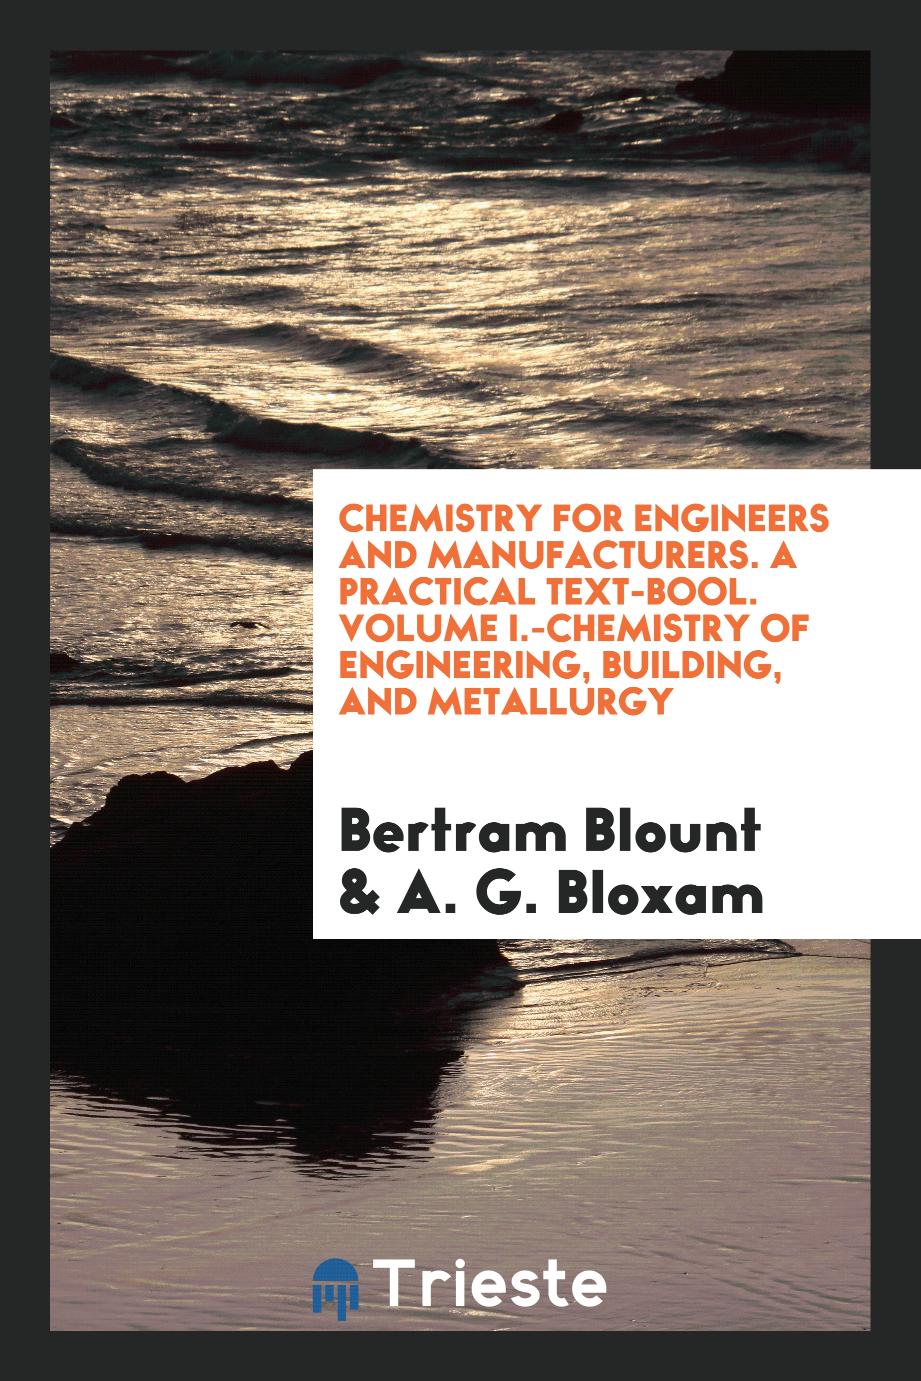 Bertram Blount, A. G. Bloxam - Chemistry for Engineers and Manufacturers. A Practical Text-Bool. Volume I.-Chemistry of Engineering, Building, and Metallurgy